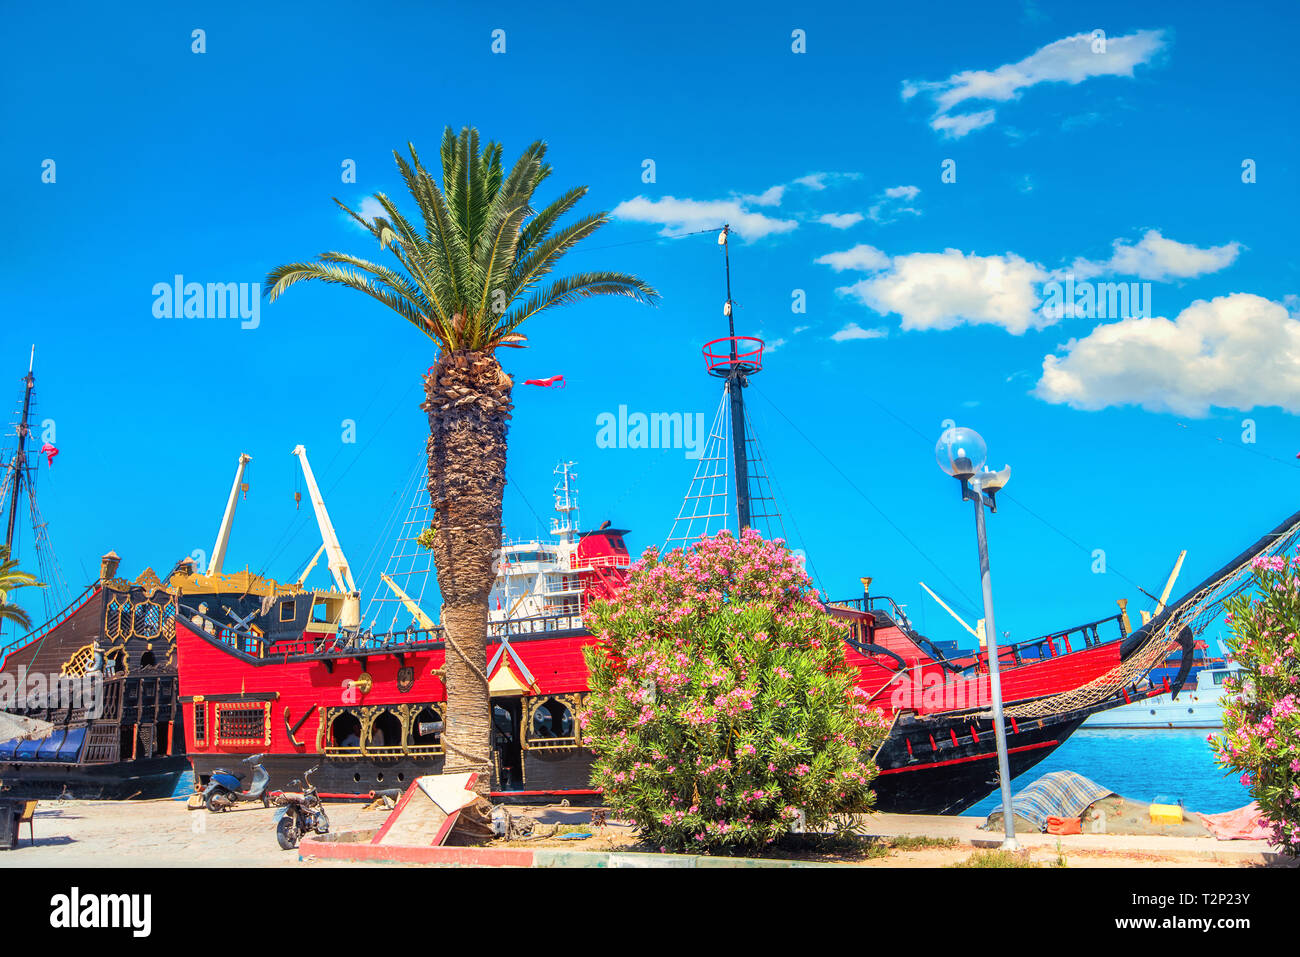 Landscape with old ships for excursions on city embankment in Sousse. Tunisia, North Africa Stock Photo